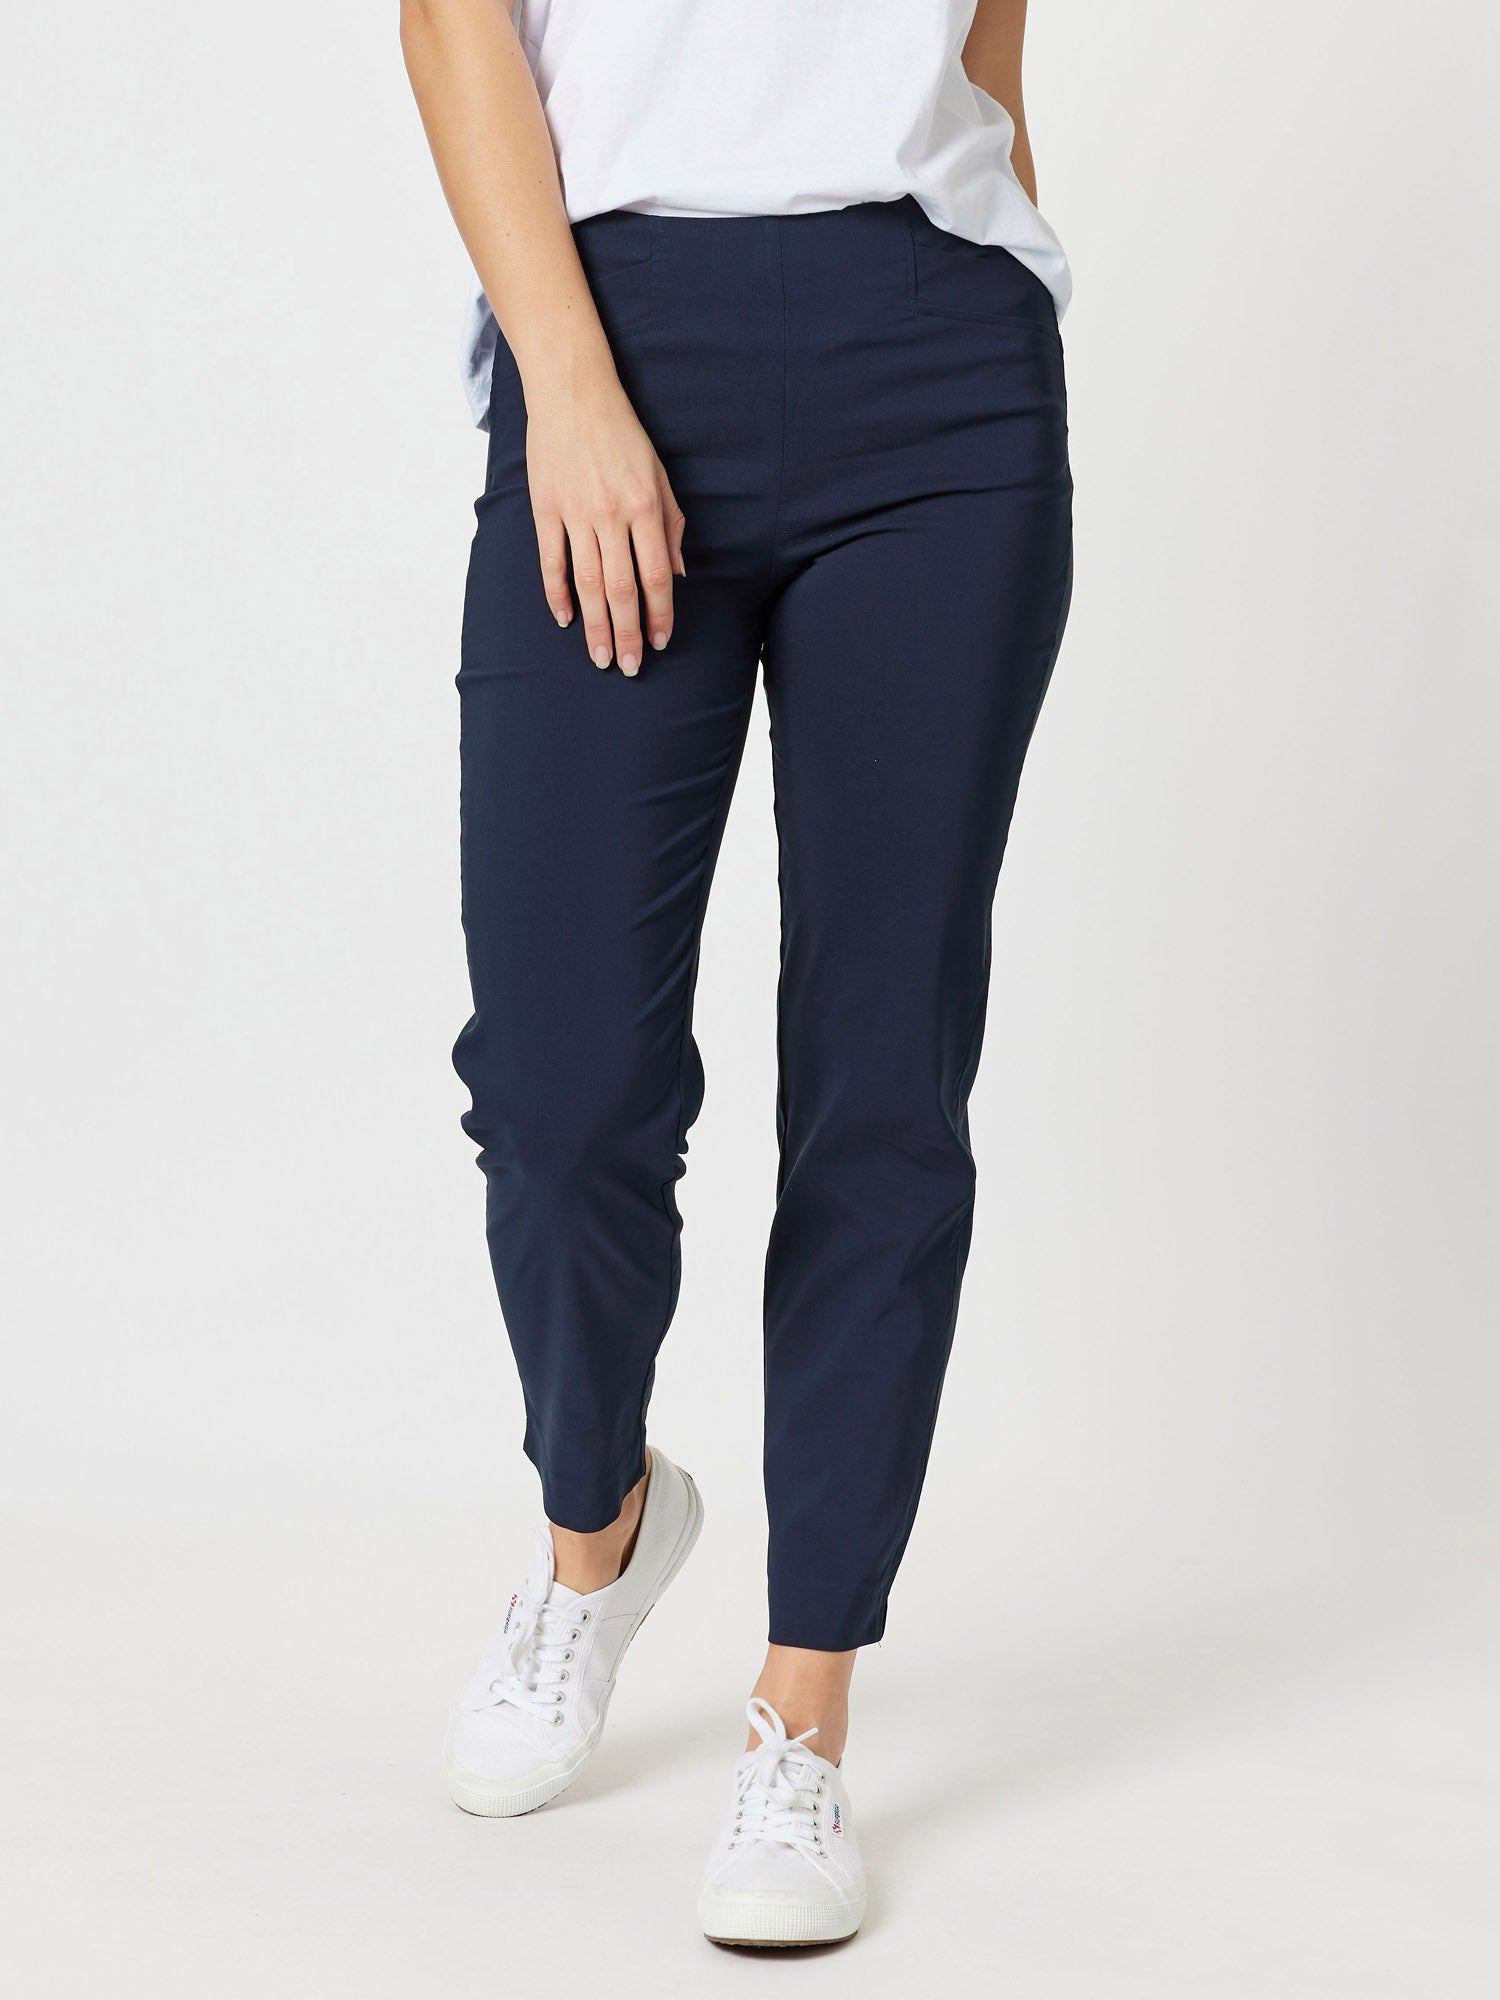 Black High Waisted Skinny Trousers in Stretch | Simply Be